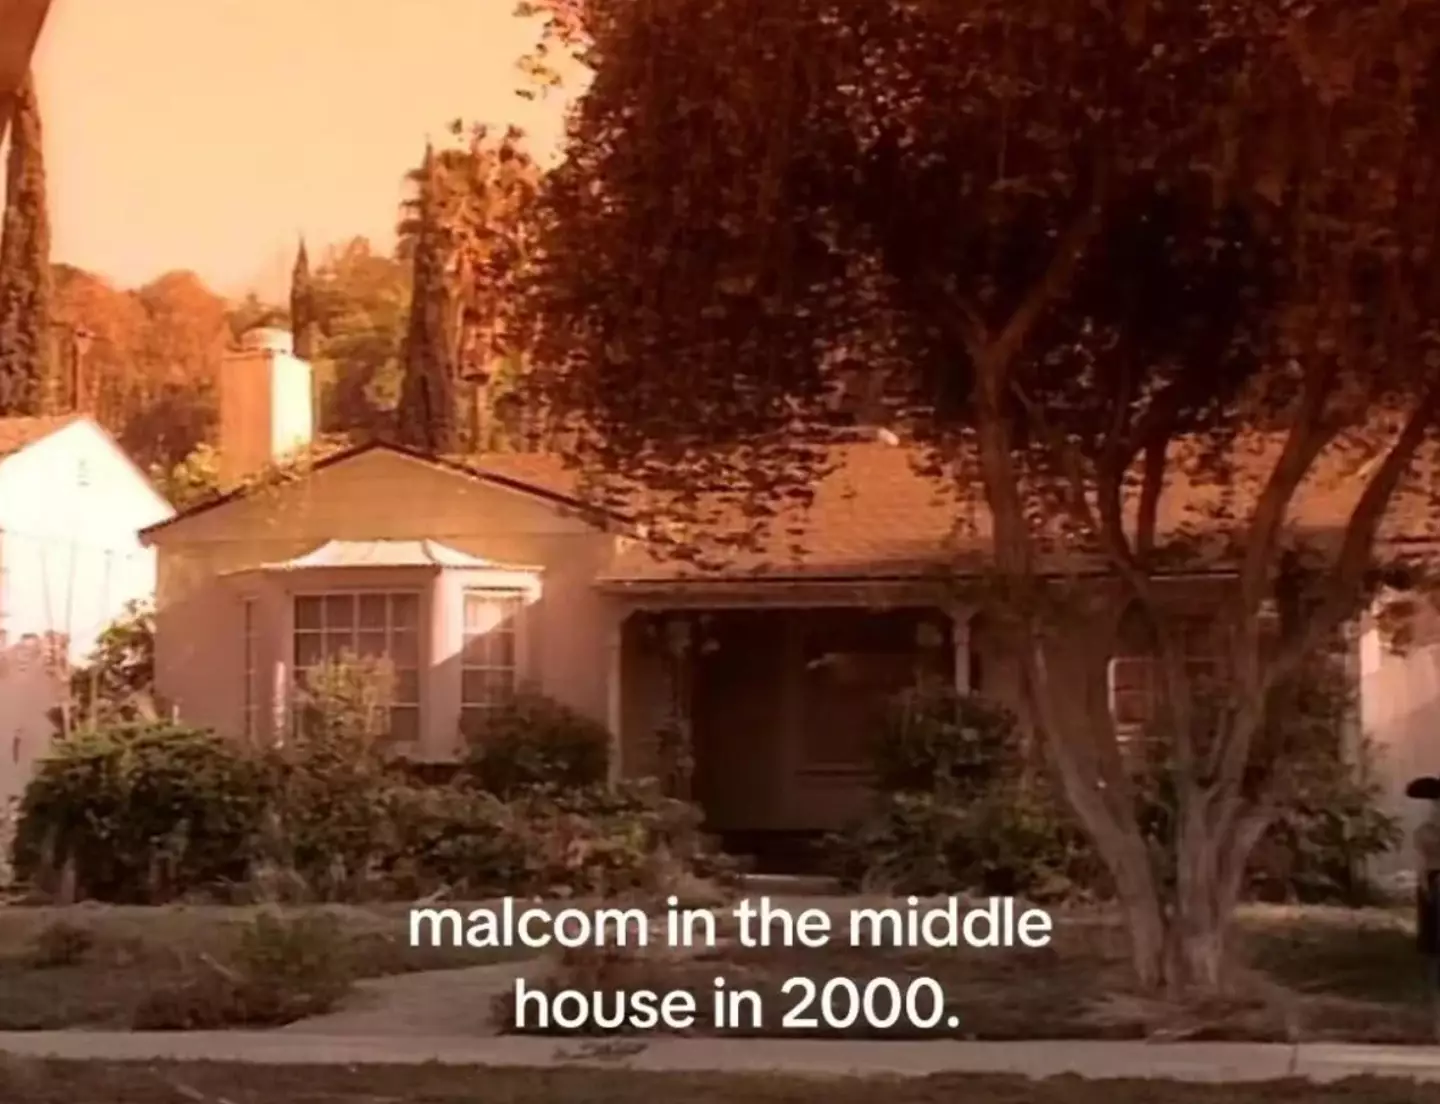 Many fans will remember the bungalow from the show. (Disney+/Reddit)